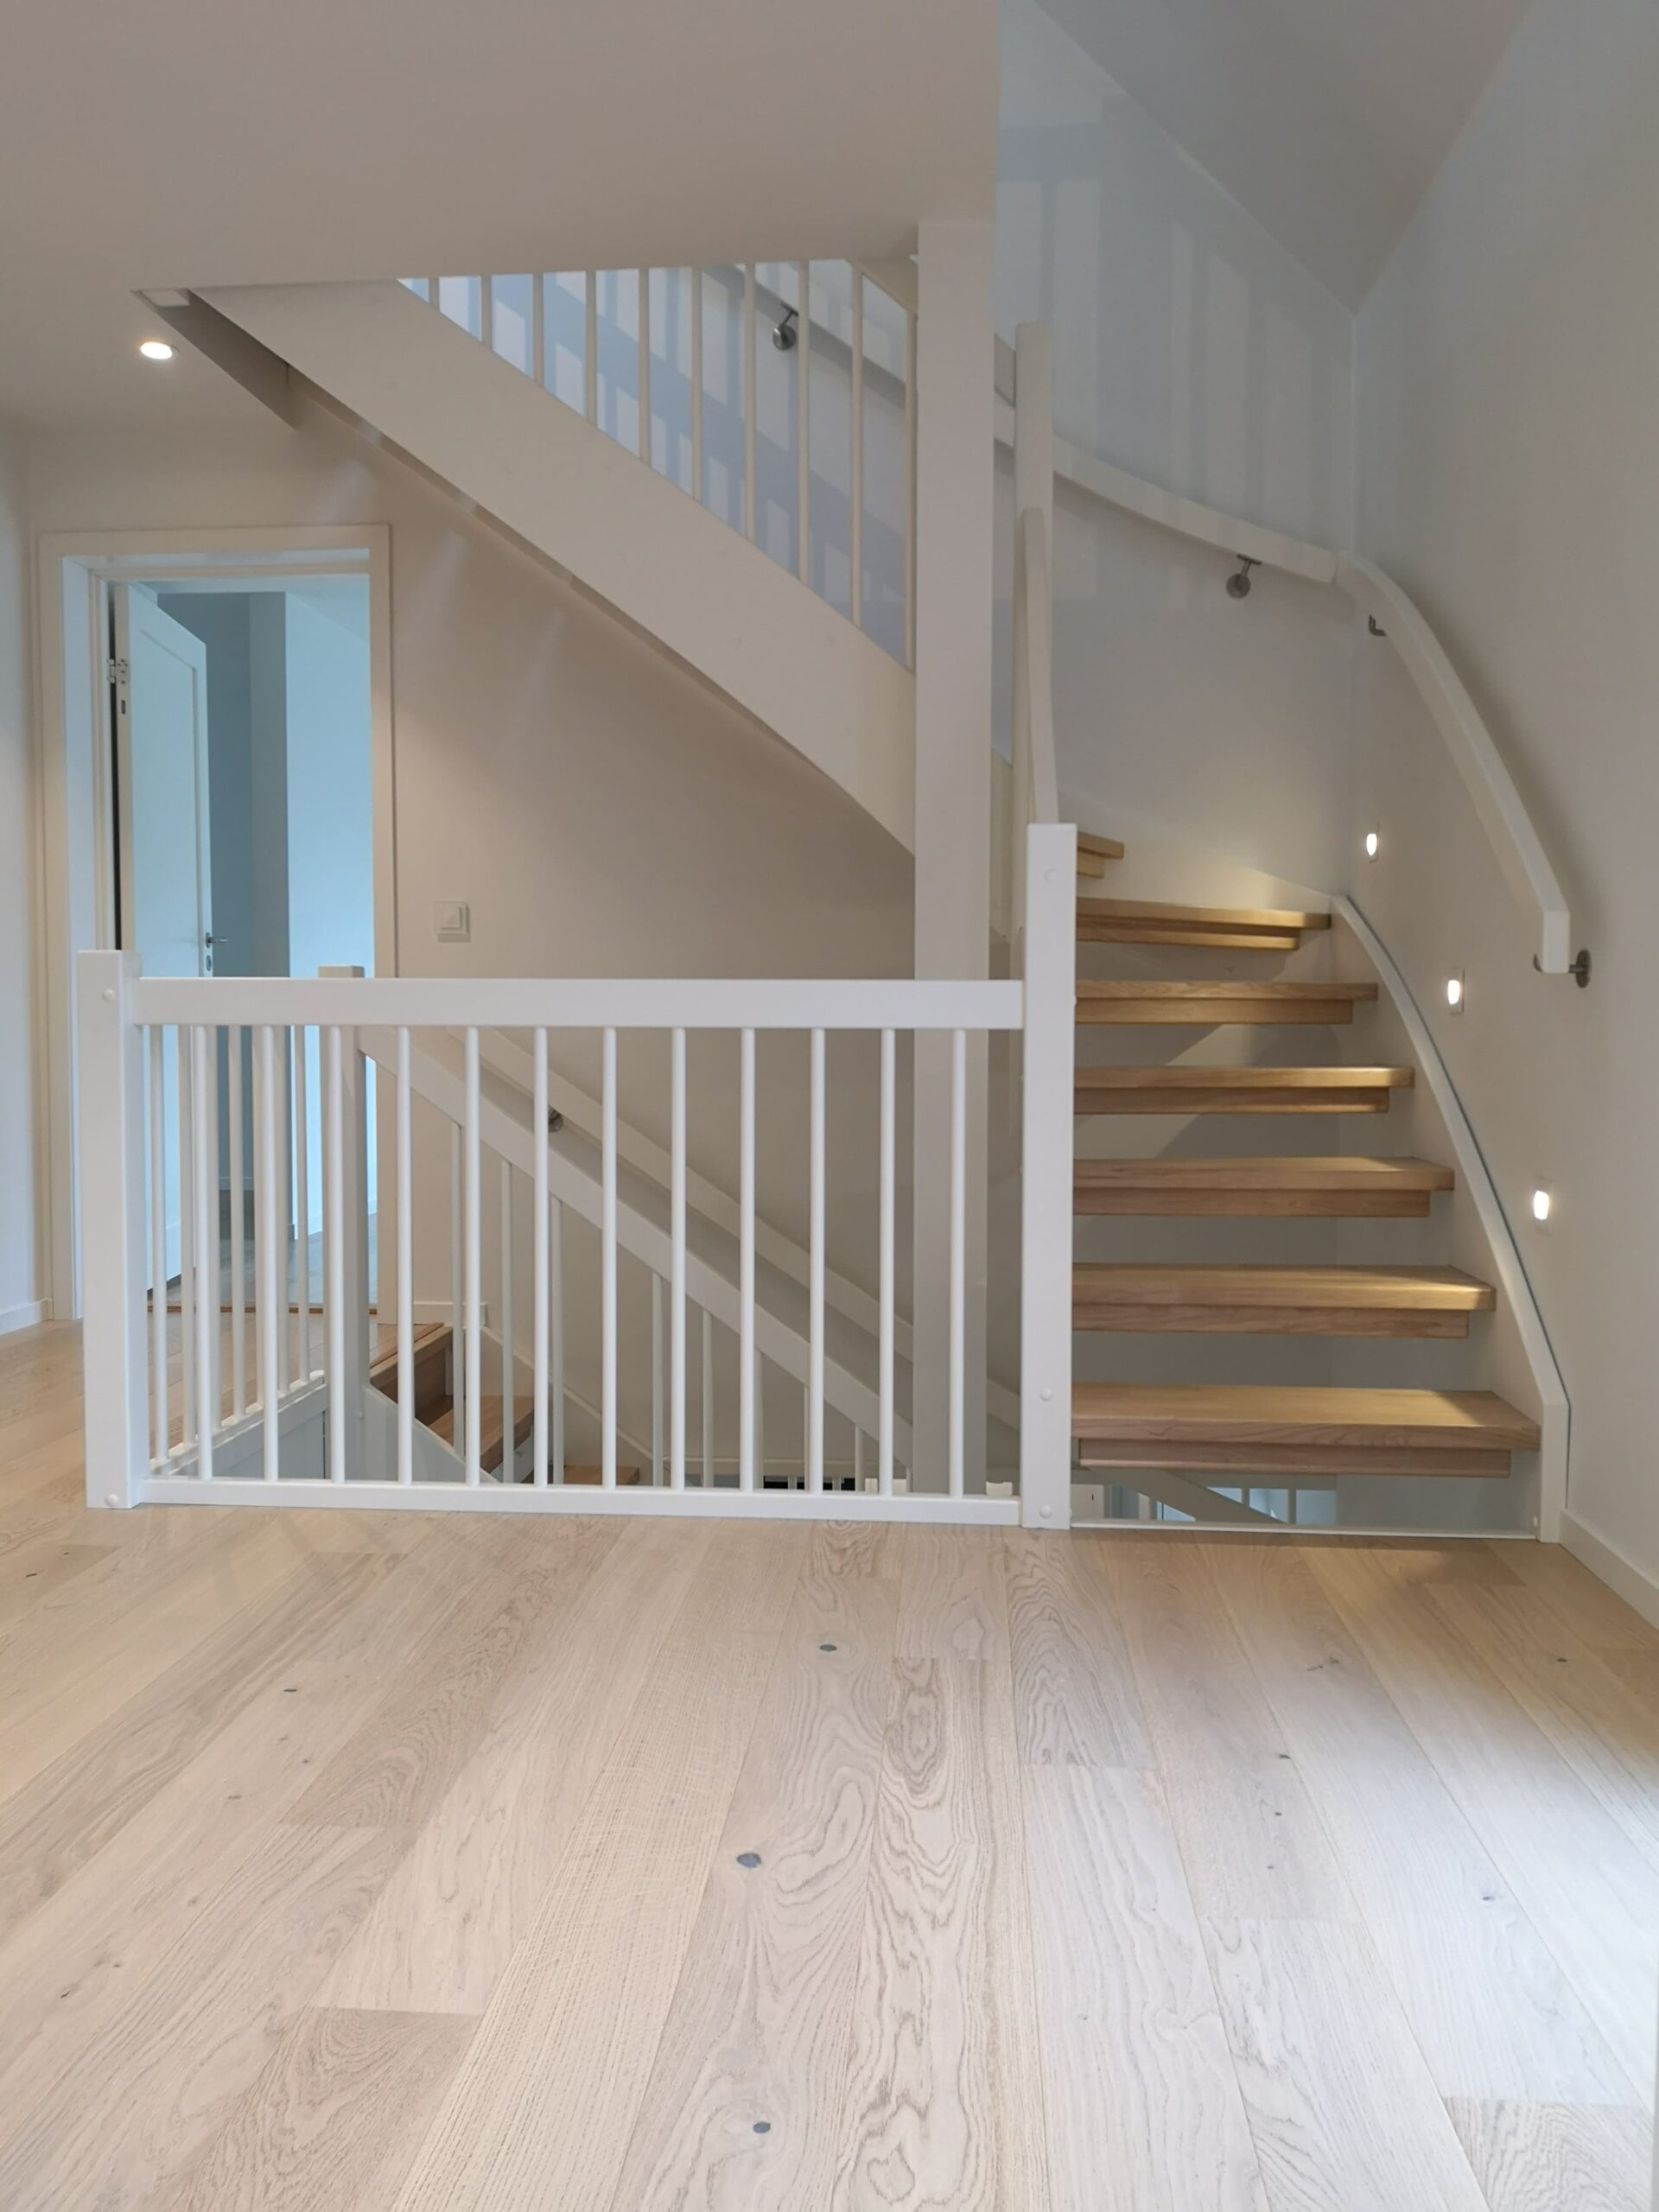 02. White, light wood and oak staircase with handrail through two floors